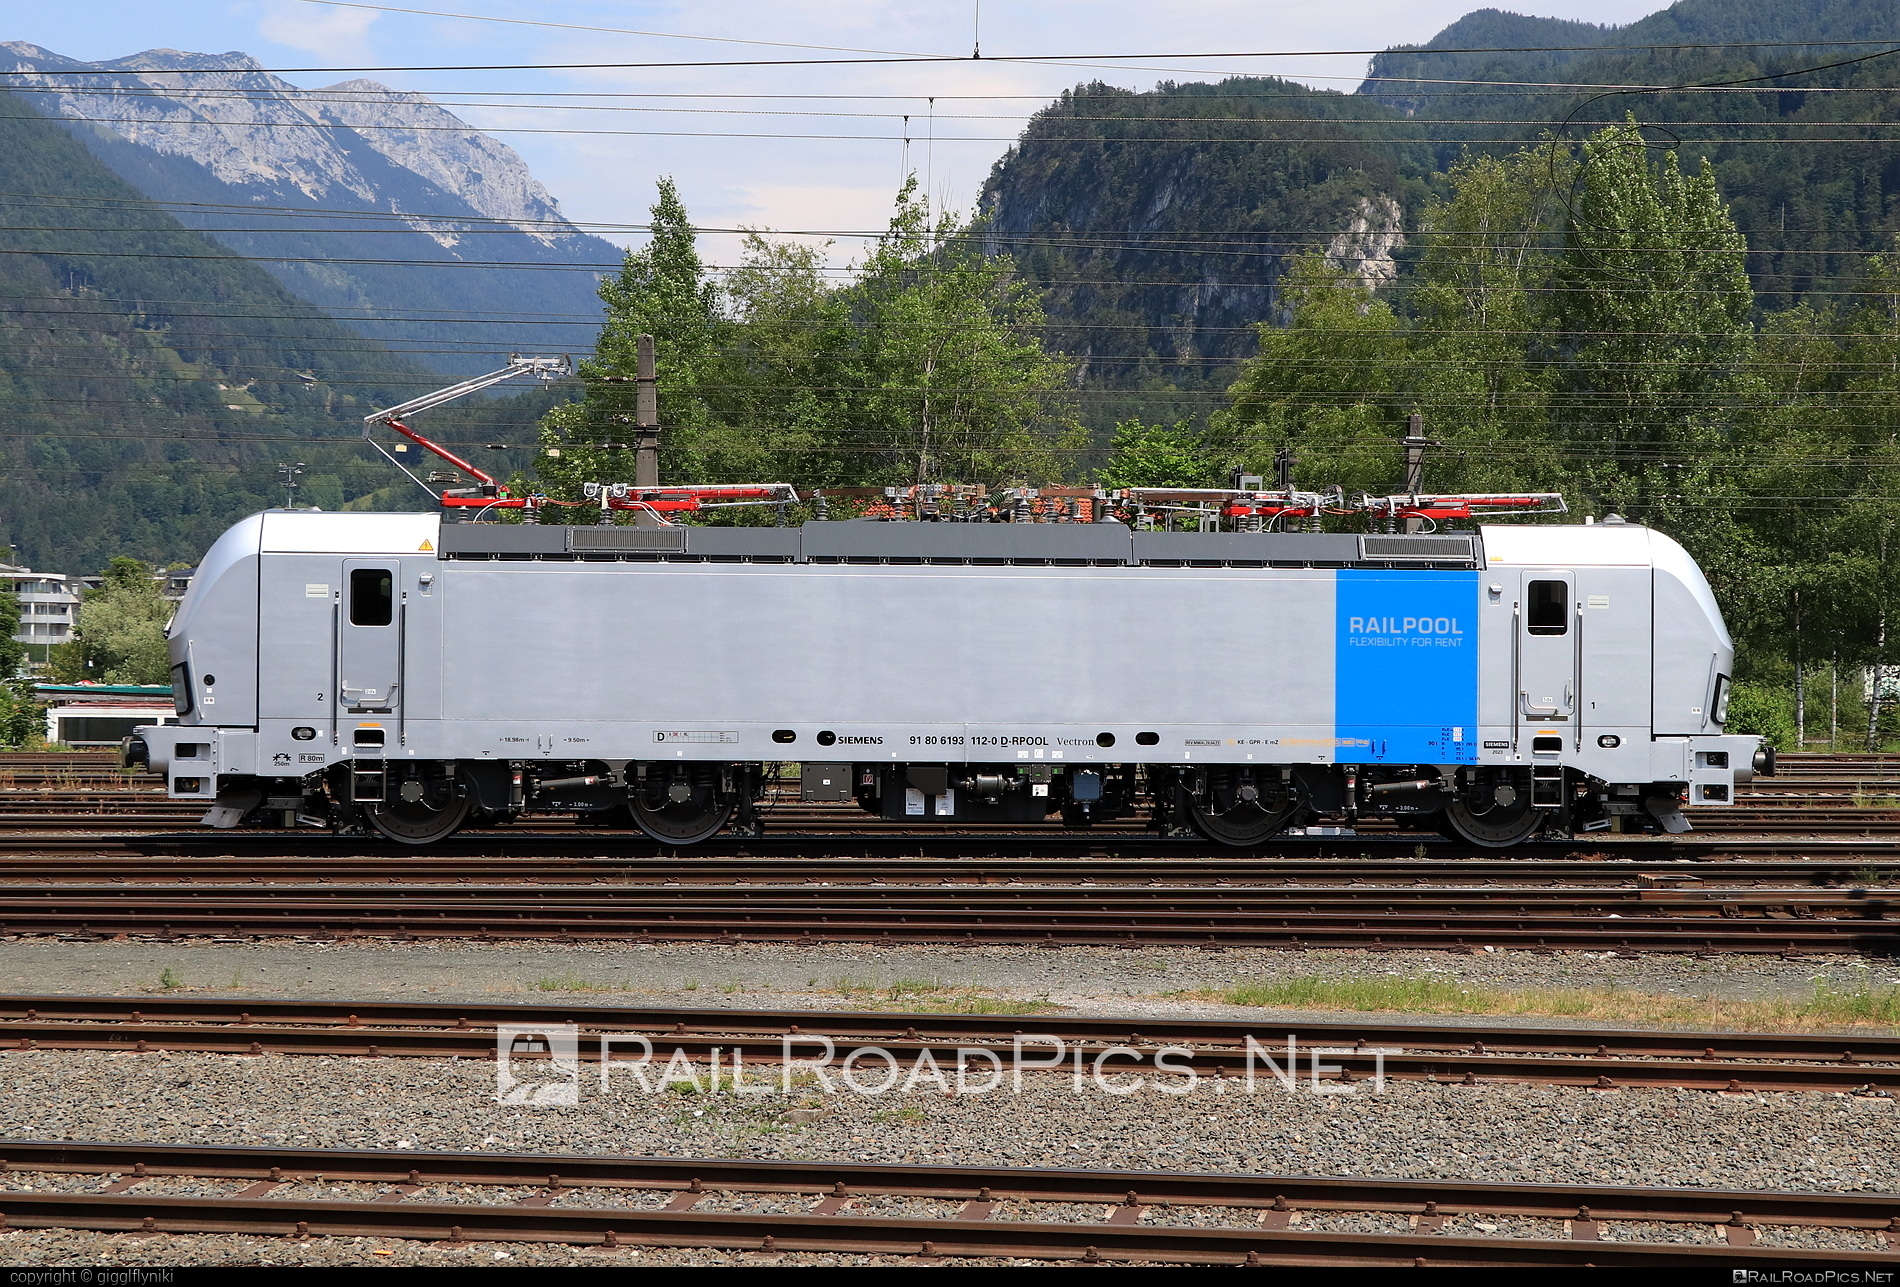 Siemens Vectron MS - 6193 112 operated by TXLogistik #railpool #railpoolgmbh #siemens #siemensVectron #siemensVectronMS #txlogistik #vectron #vectronMS